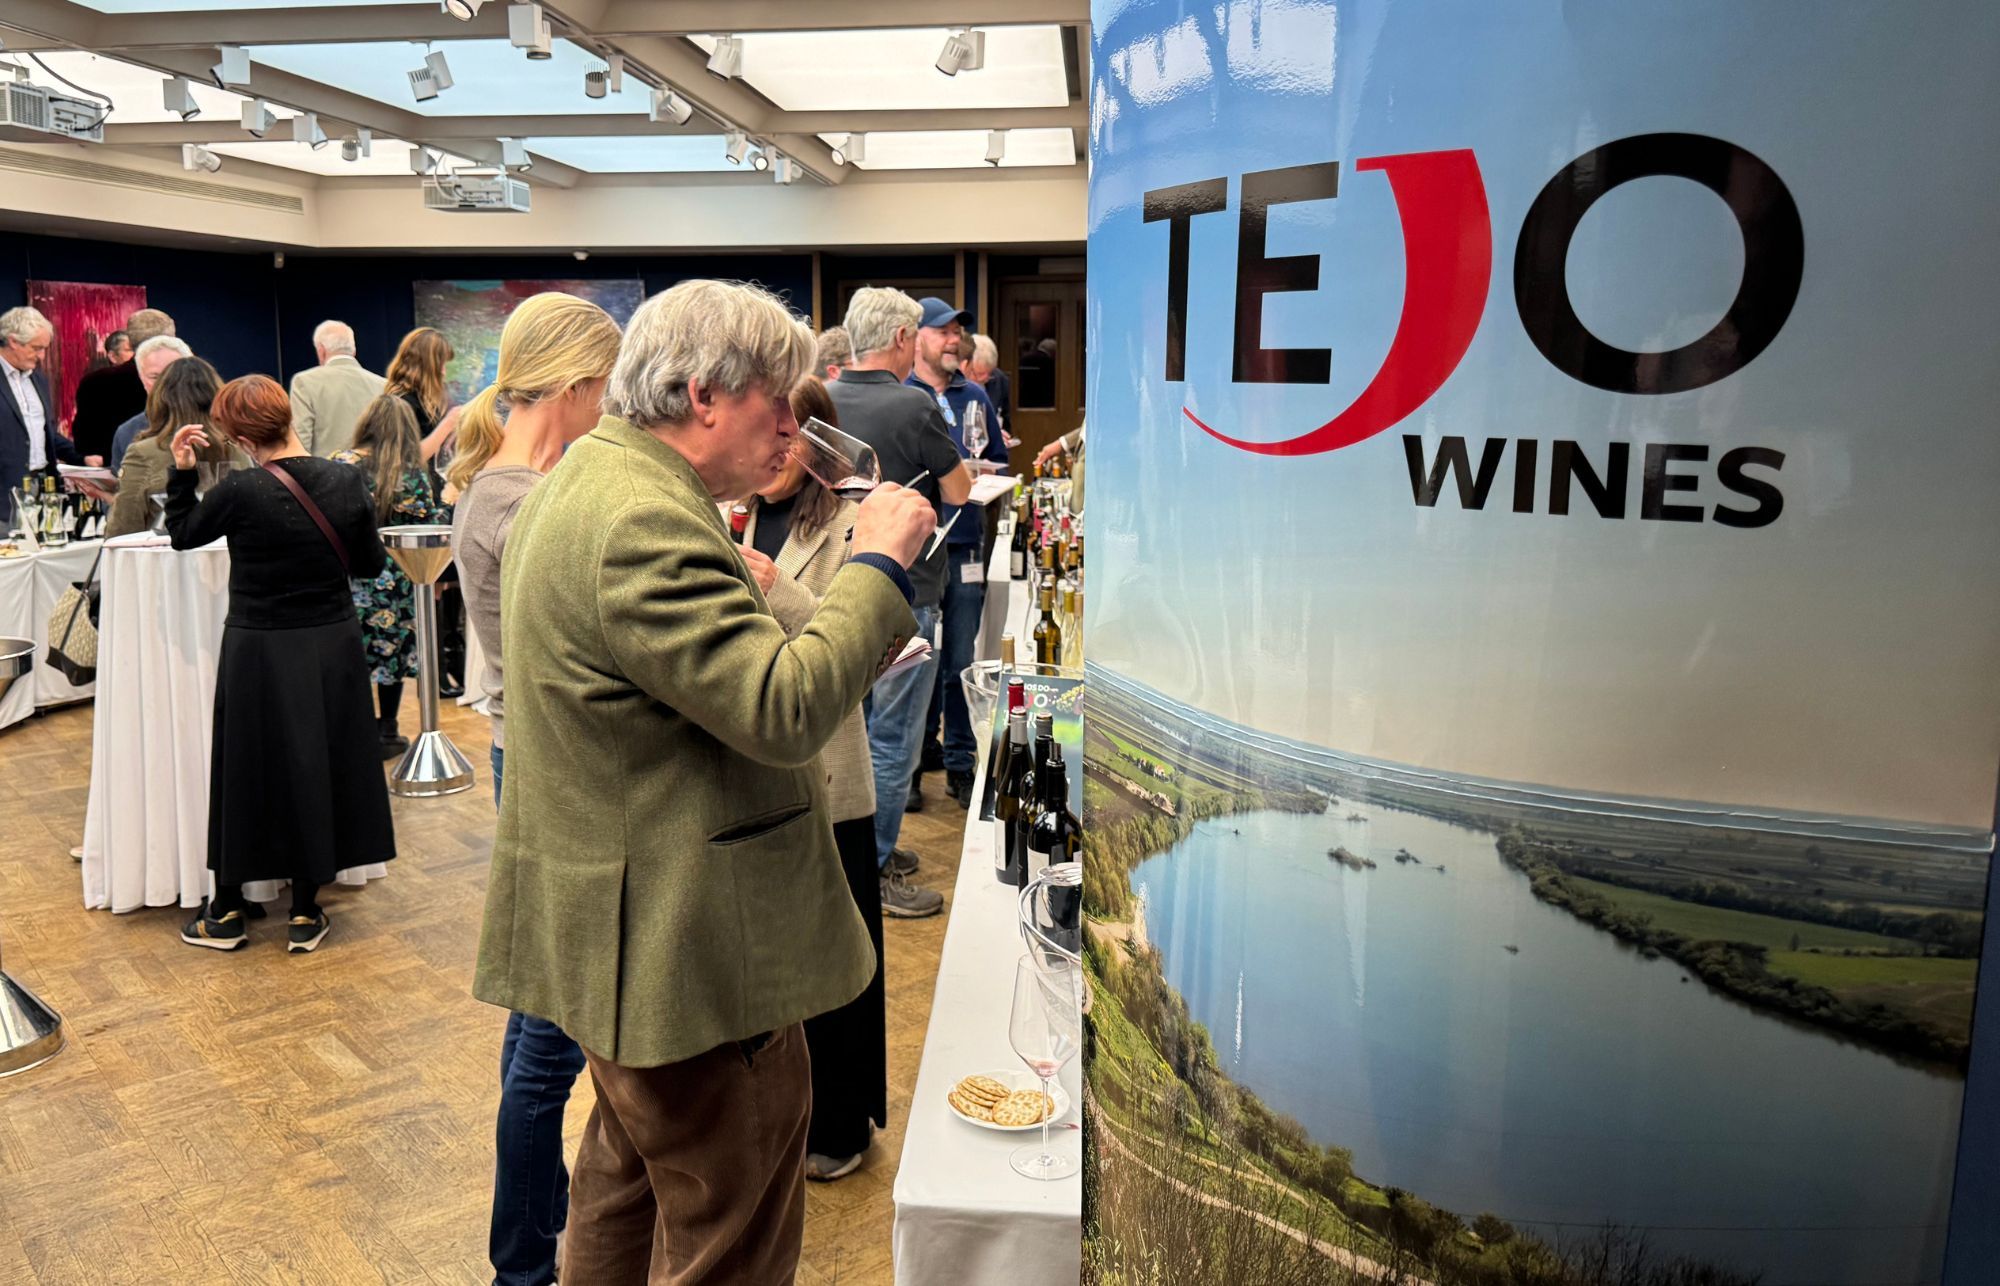 Mike Turner on why you need to have the wines of Tejo in your life